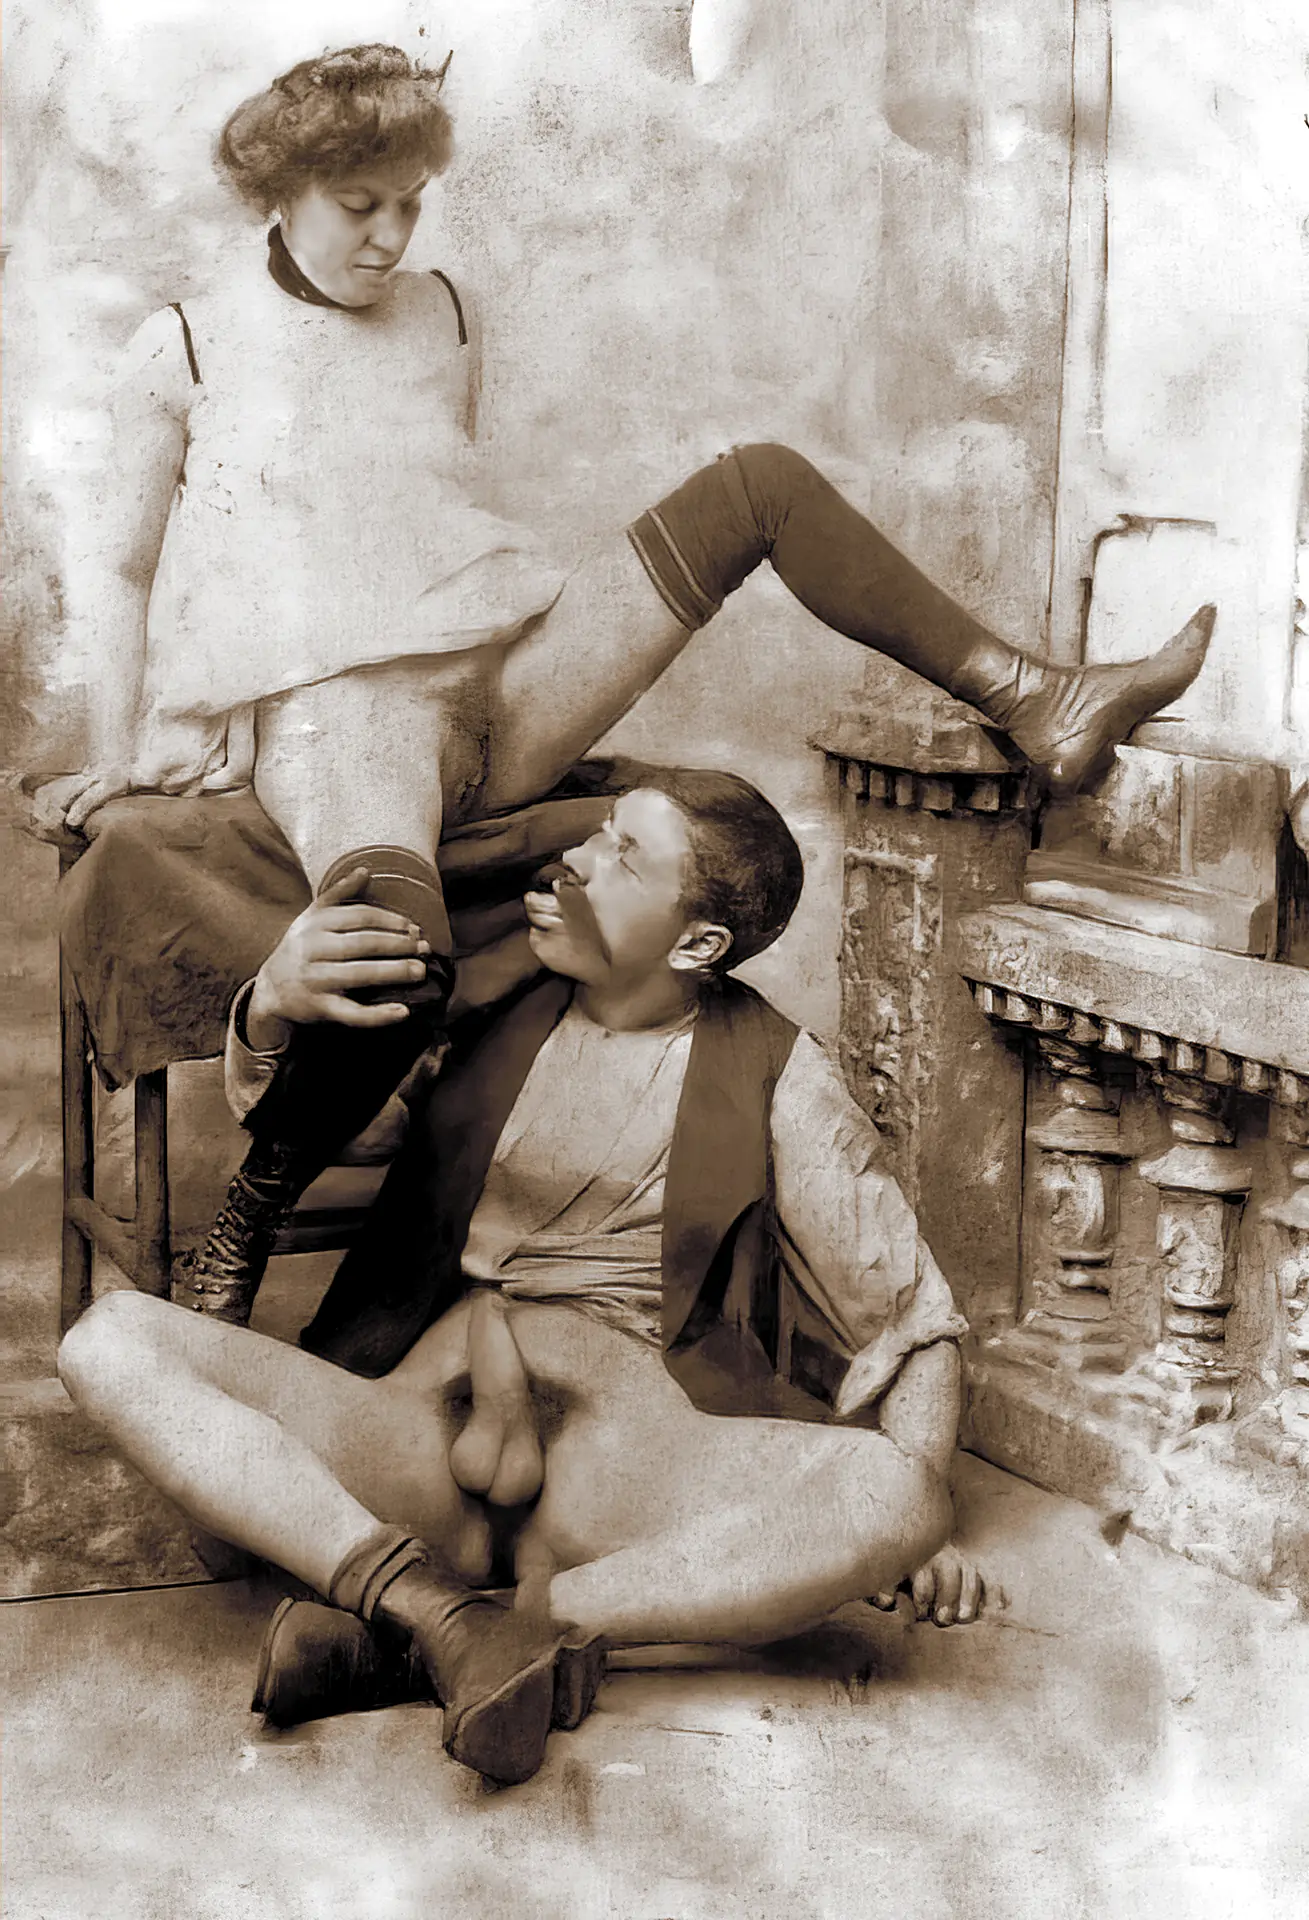 Vintage voyeur porn photos with old mustached janitor with a hard cock sitting on the floor reading to lick his madam's hairy pussy